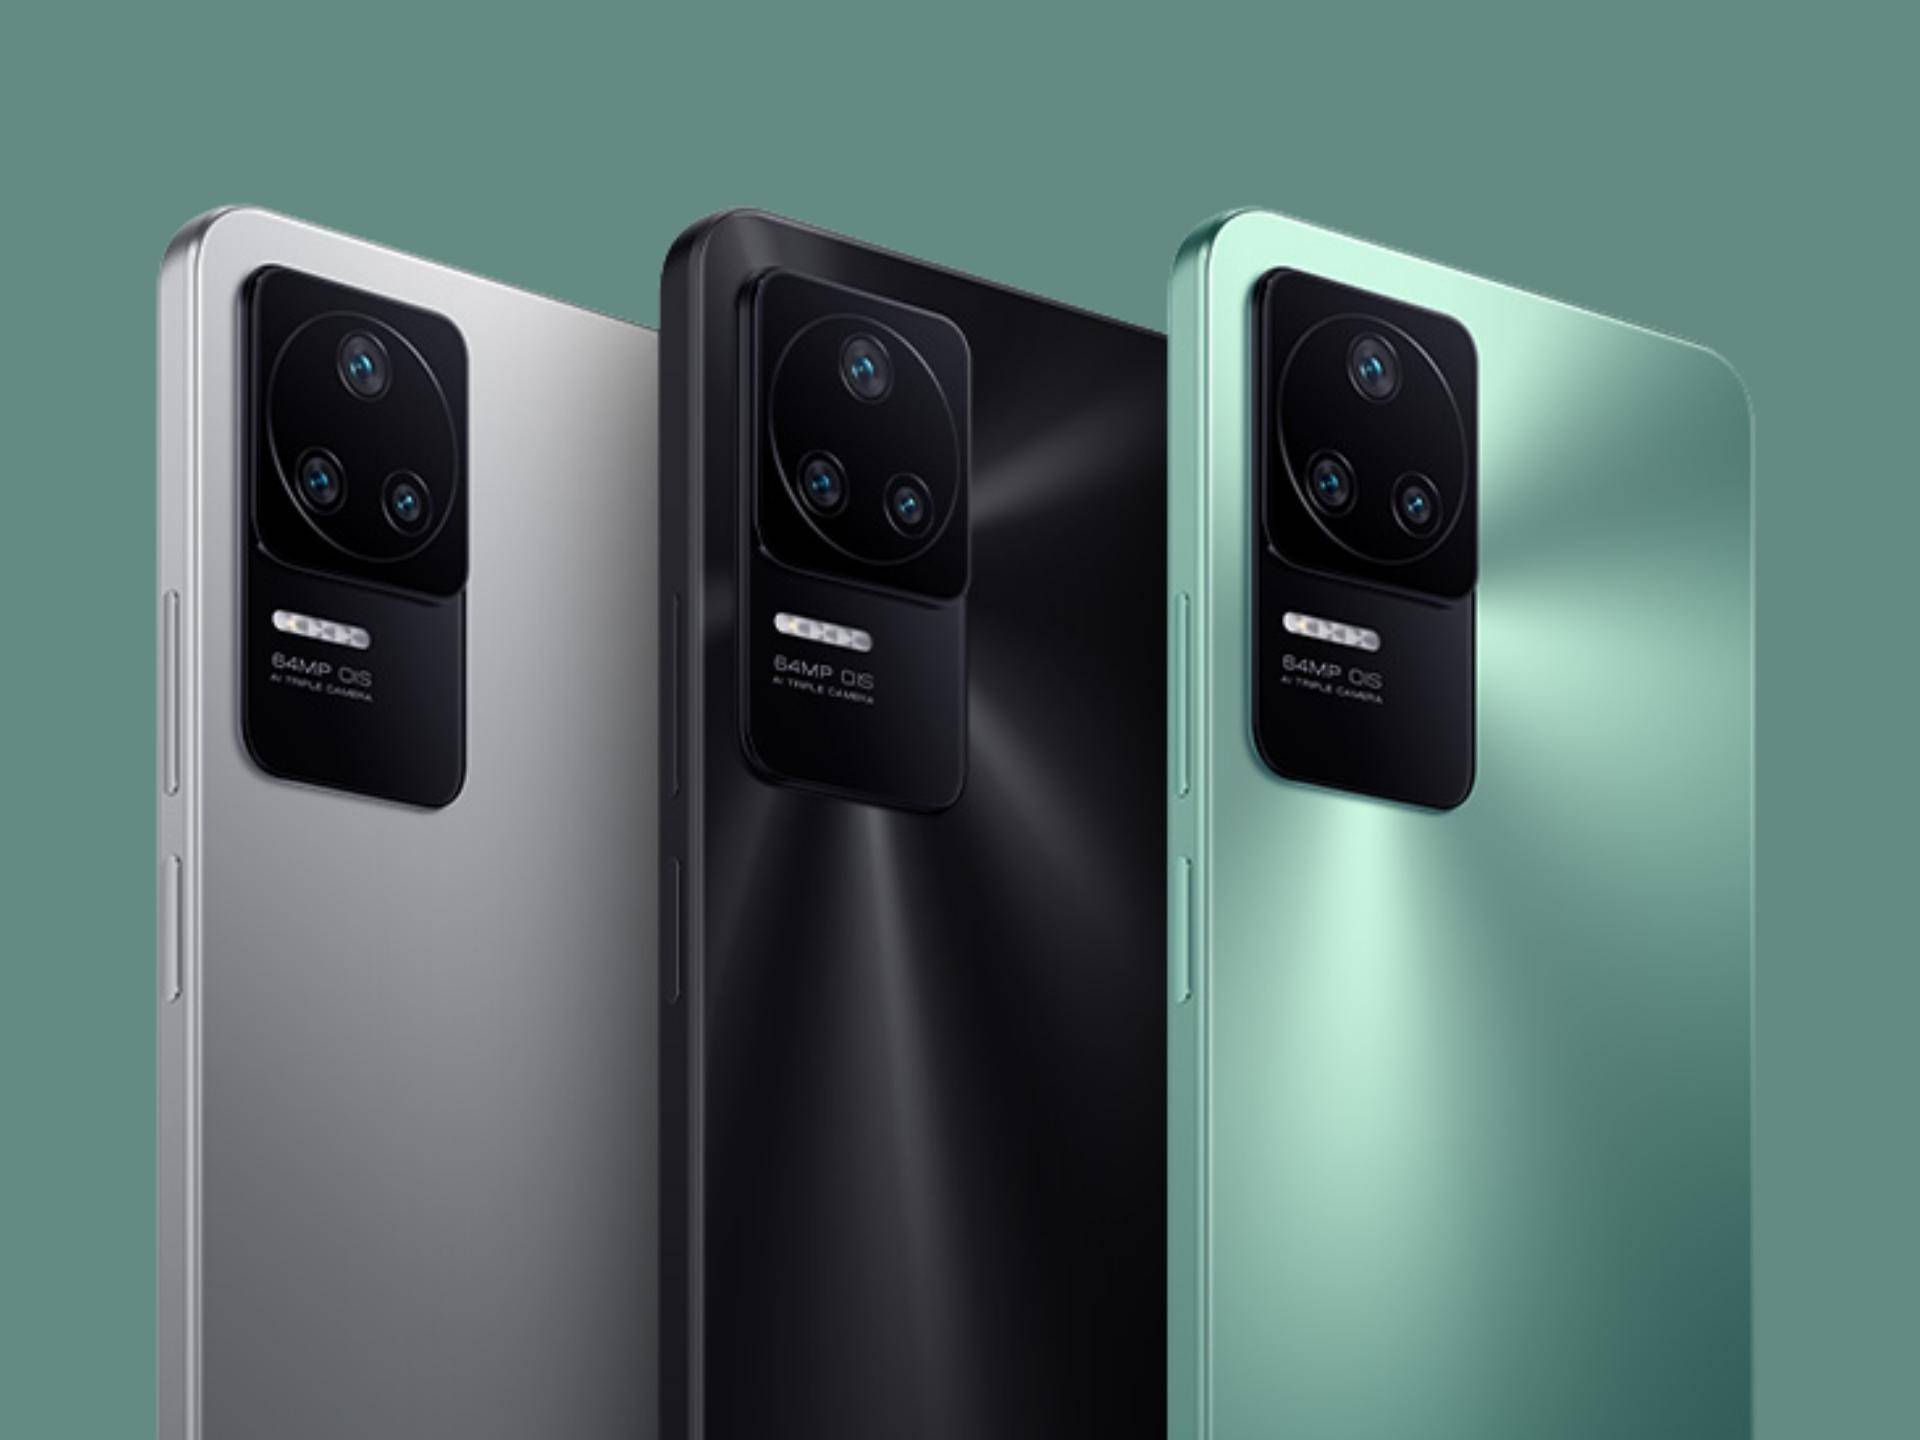 poco f4 and its three colors, silver, black and green (from left to right)